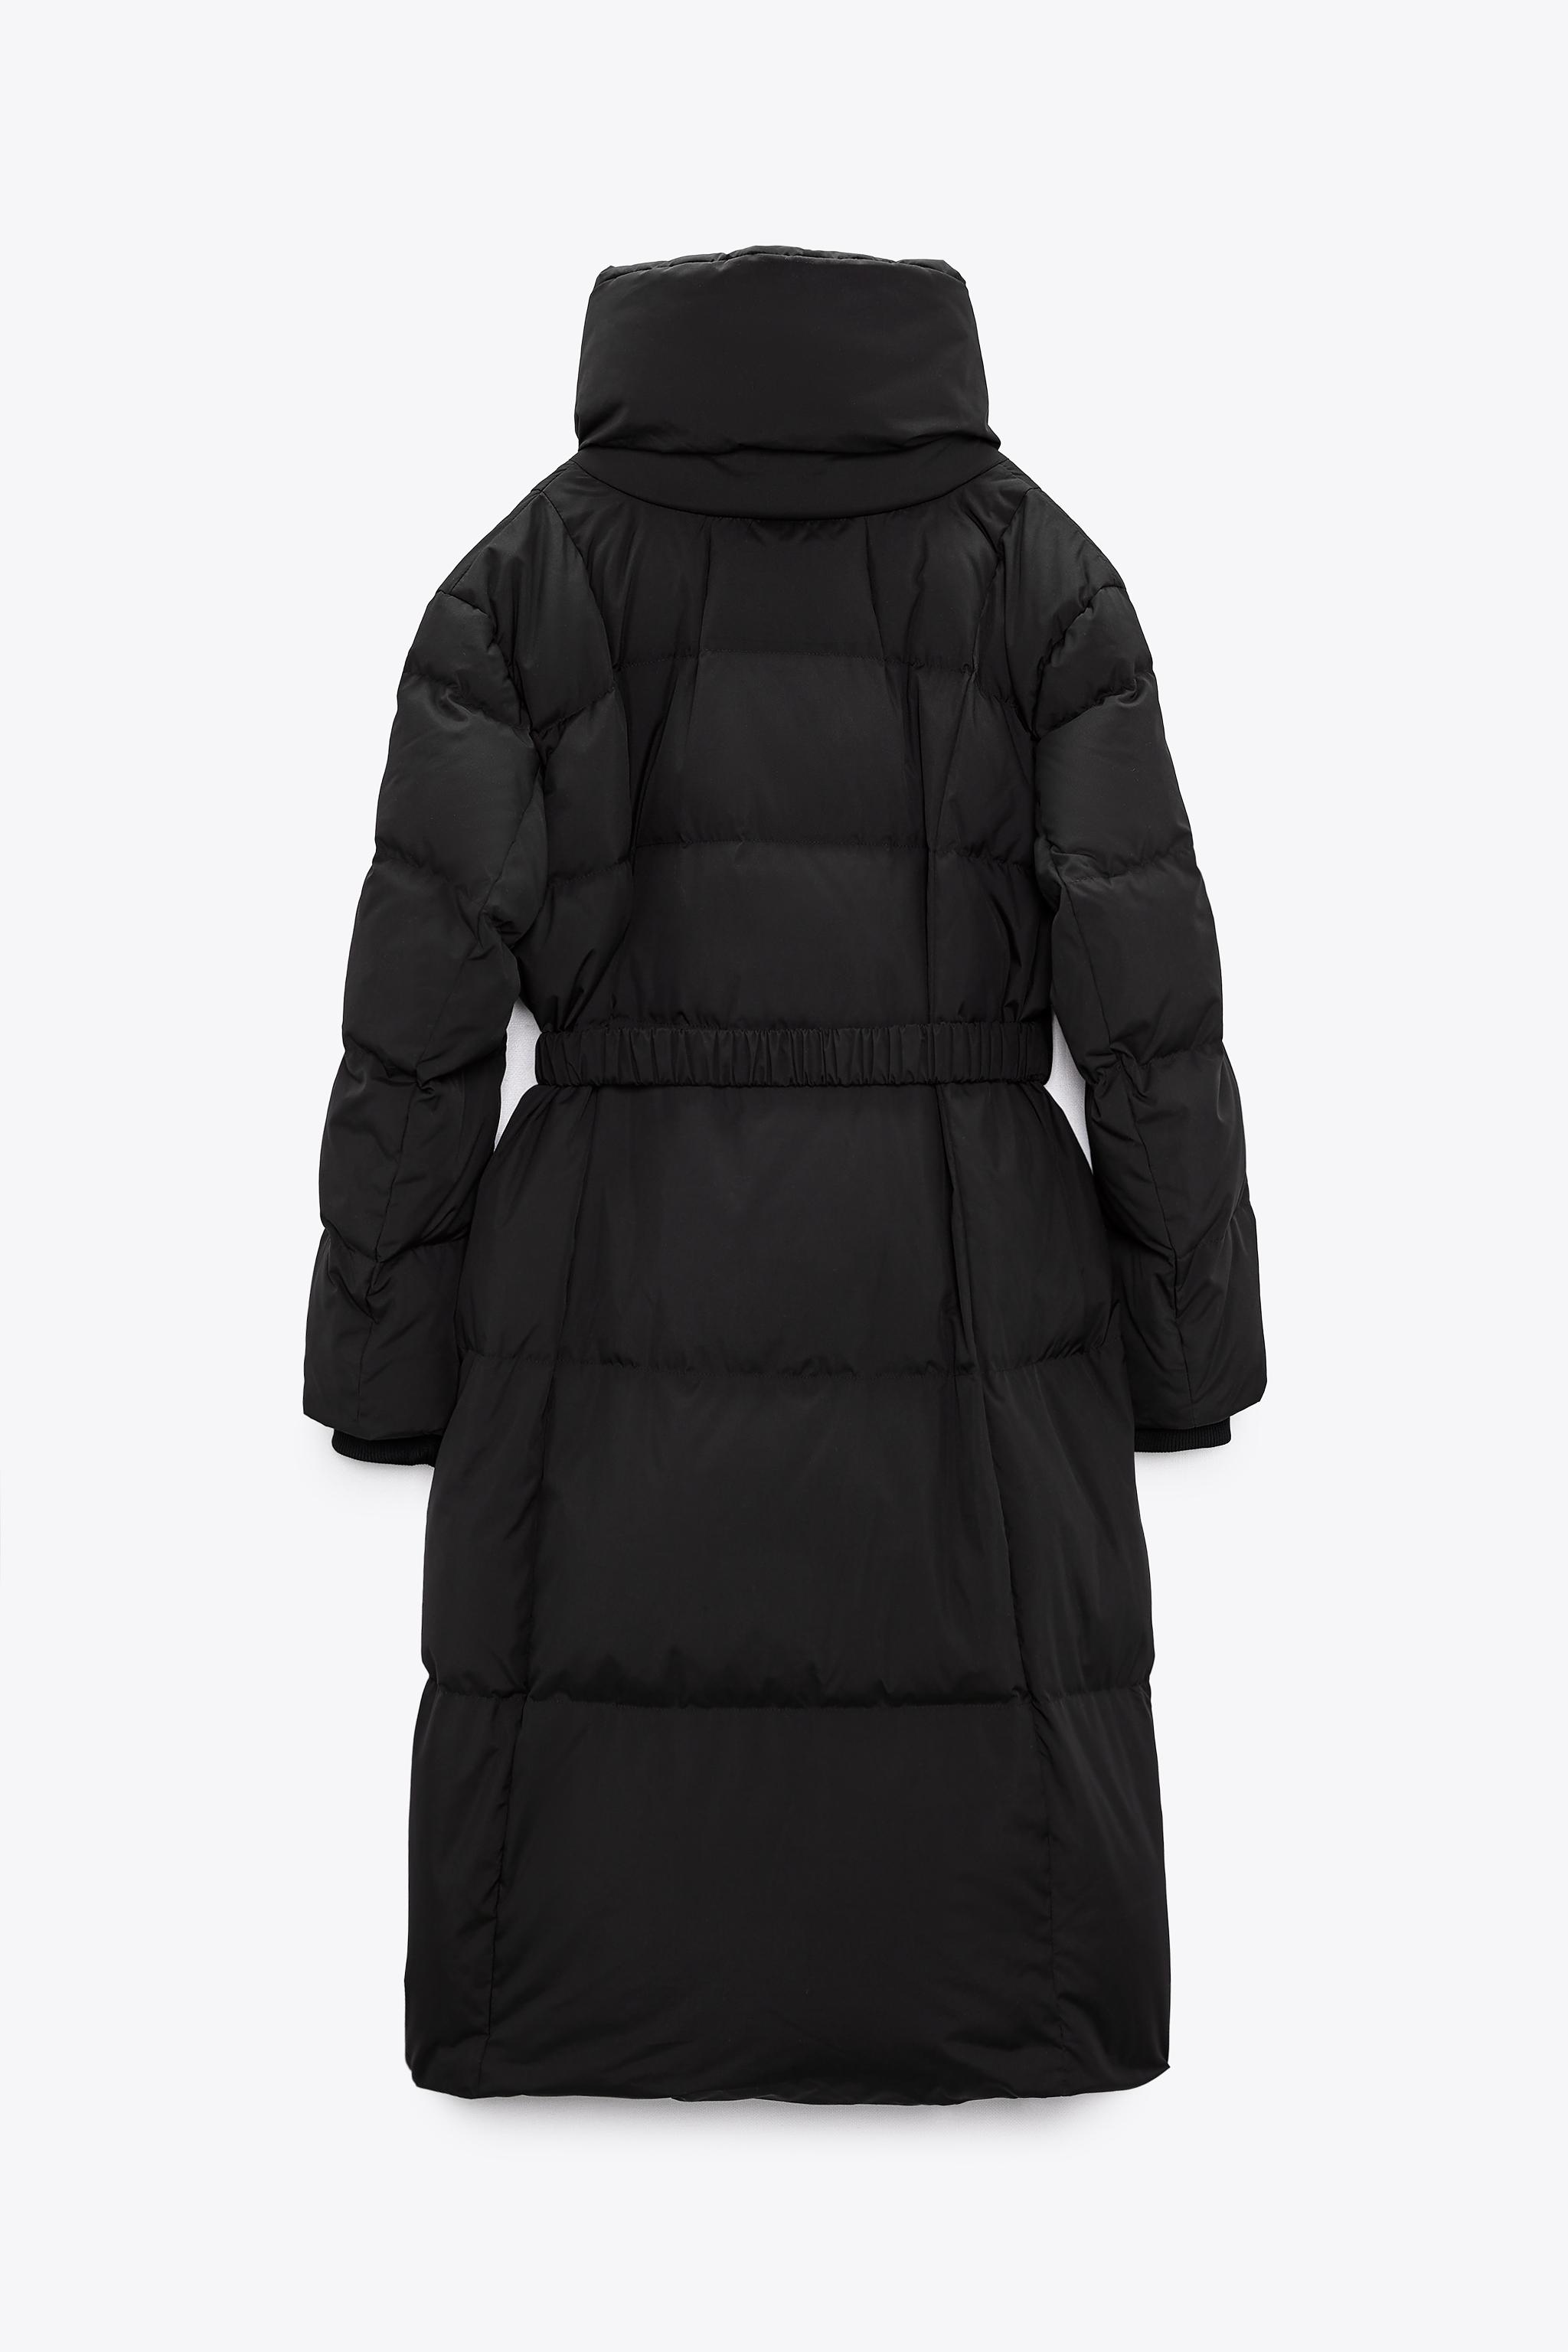 Memory 3/4 Length Puffer Jacket | Kenneth Cole Womens Puffer Coat ...